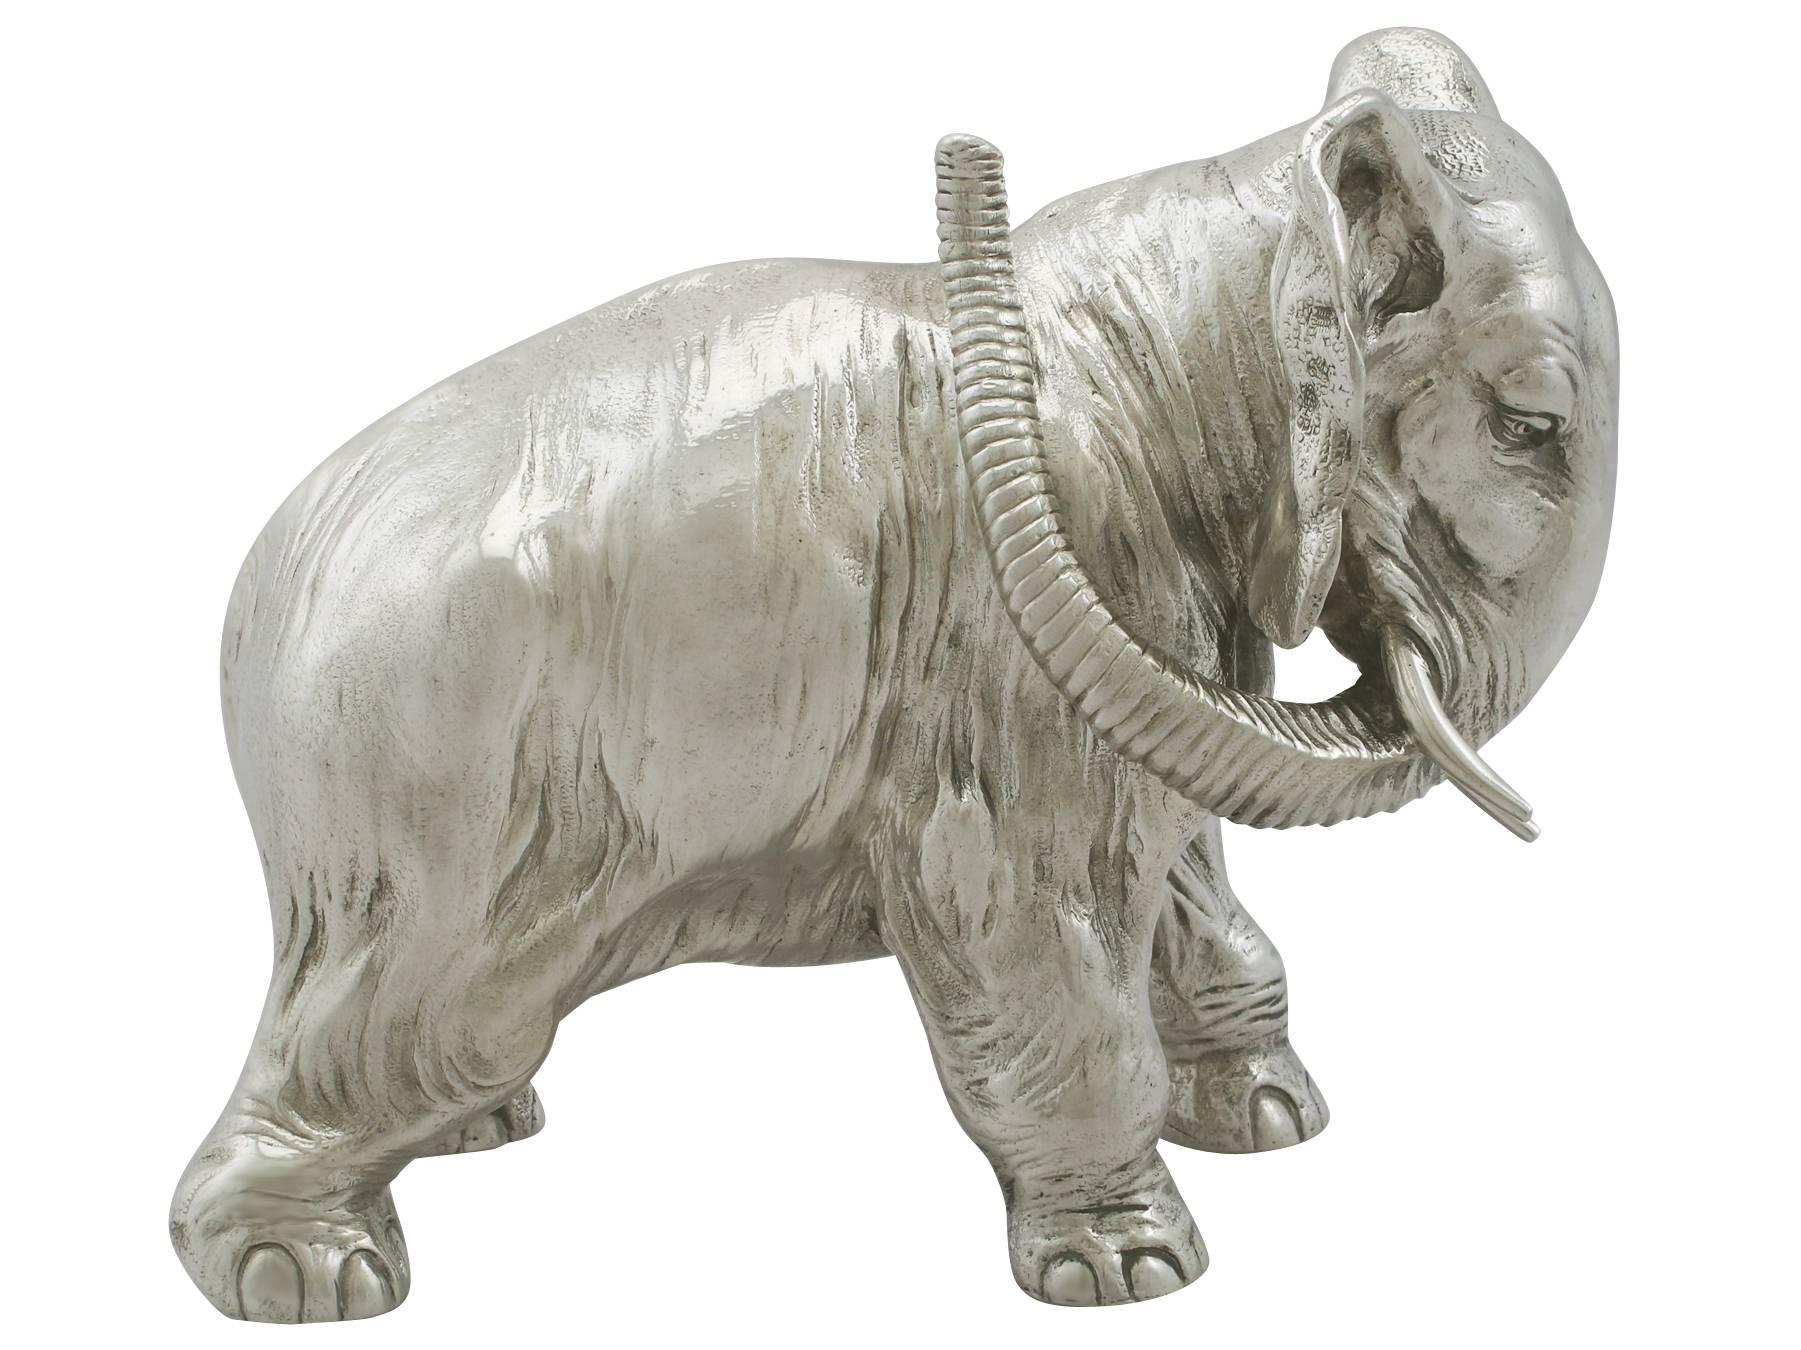 A magnificent, fine and impressive antique Russian silver table ornament of an elephant by Karl Fabergé; part of our ornamental silverware collection.

This magnificent antique cast Russian silver ornament has been realistically modelled in the form